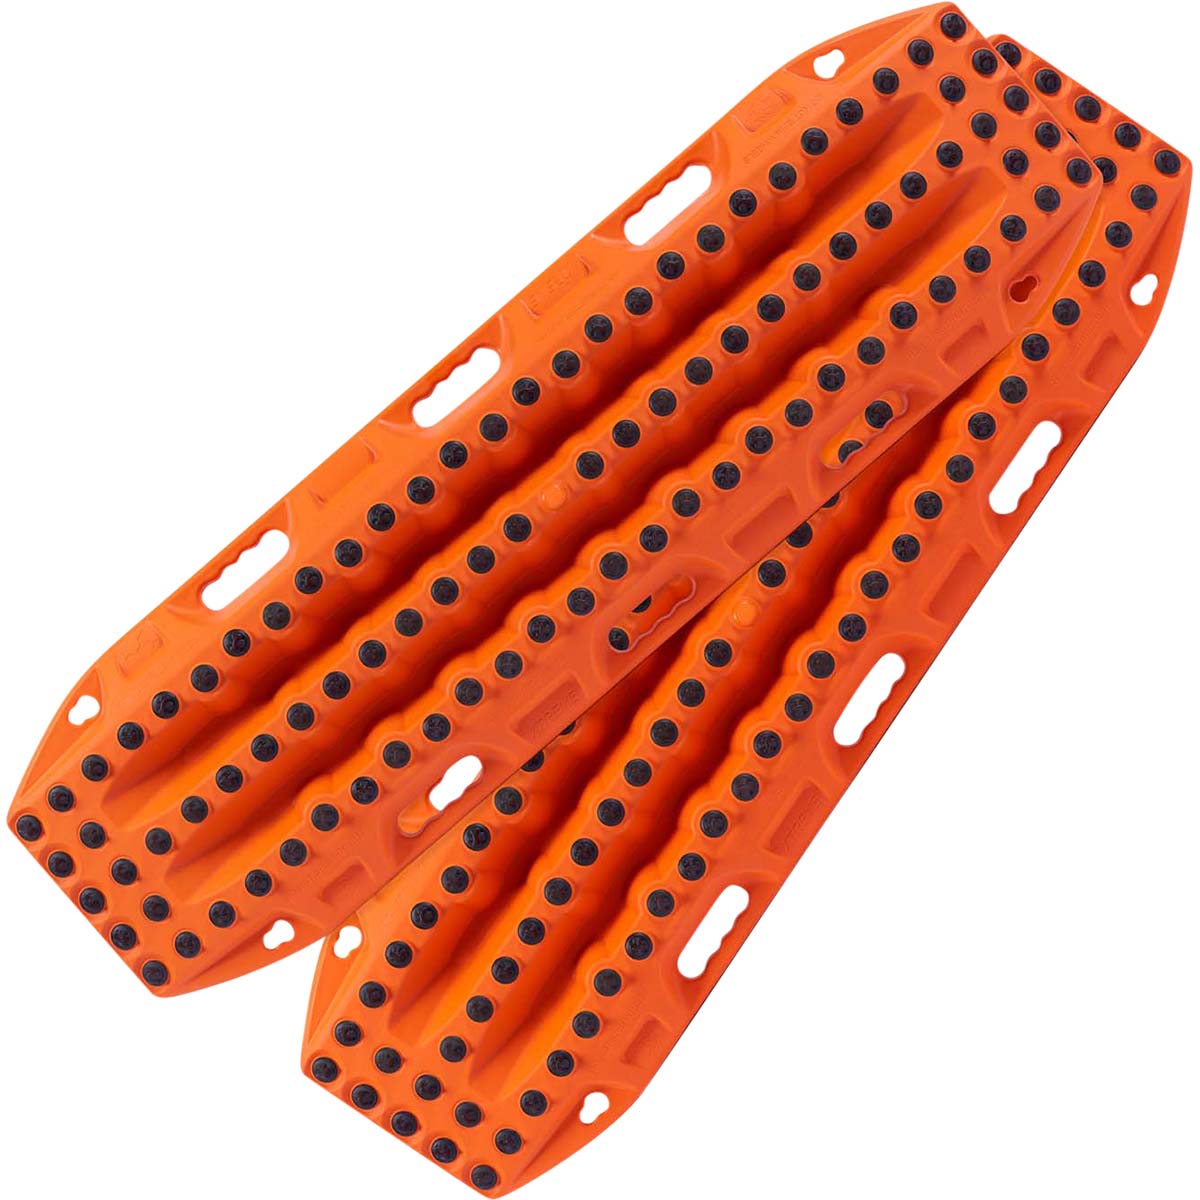 Maxtrax Xtreme Recovery Boards Signature Orange